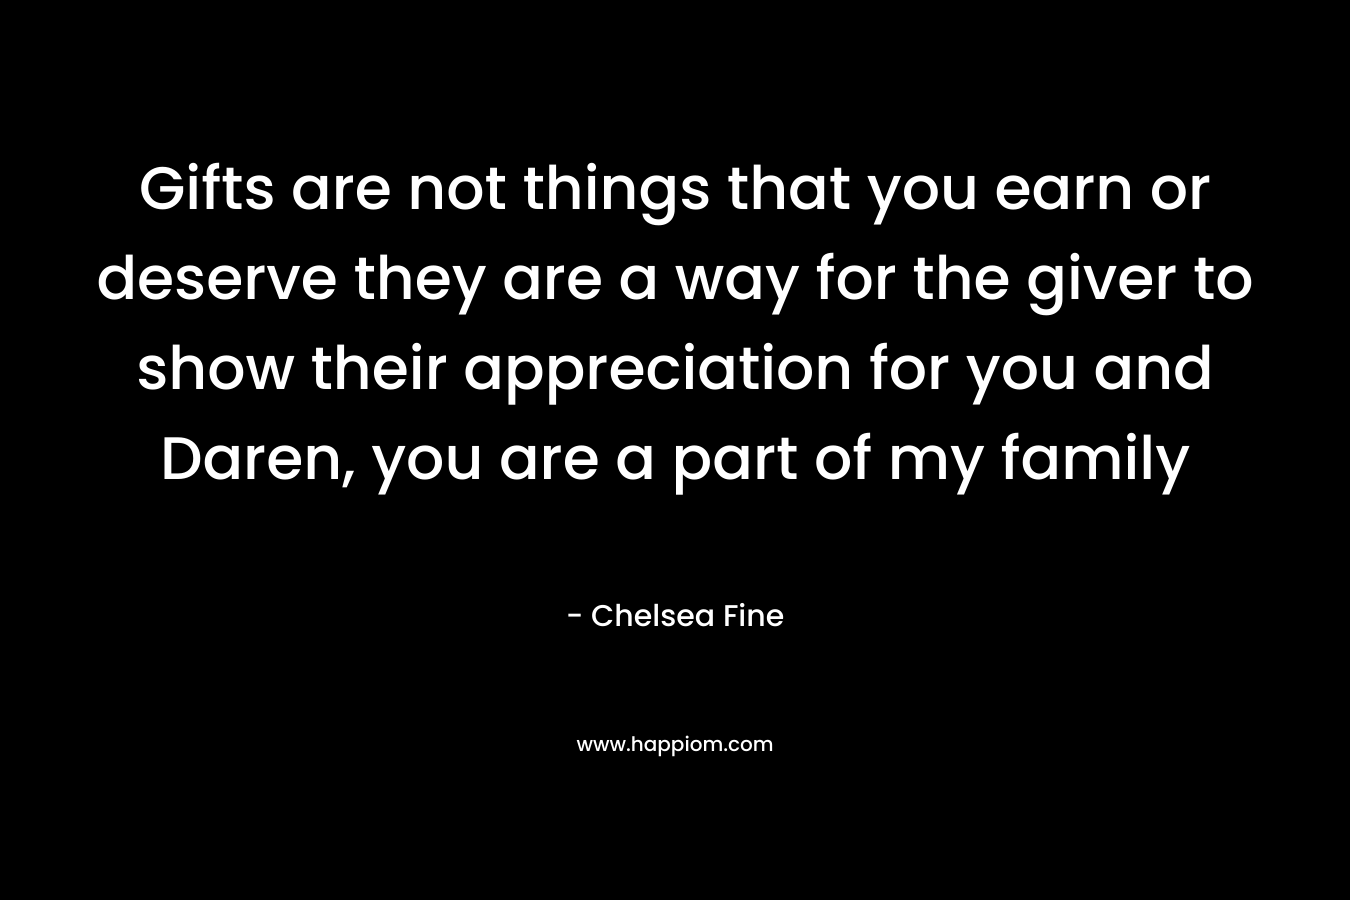 Gifts are not things that you earn or deserve they are a way for the giver to show their appreciation for you and Daren, you are a part of my family – Chelsea Fine